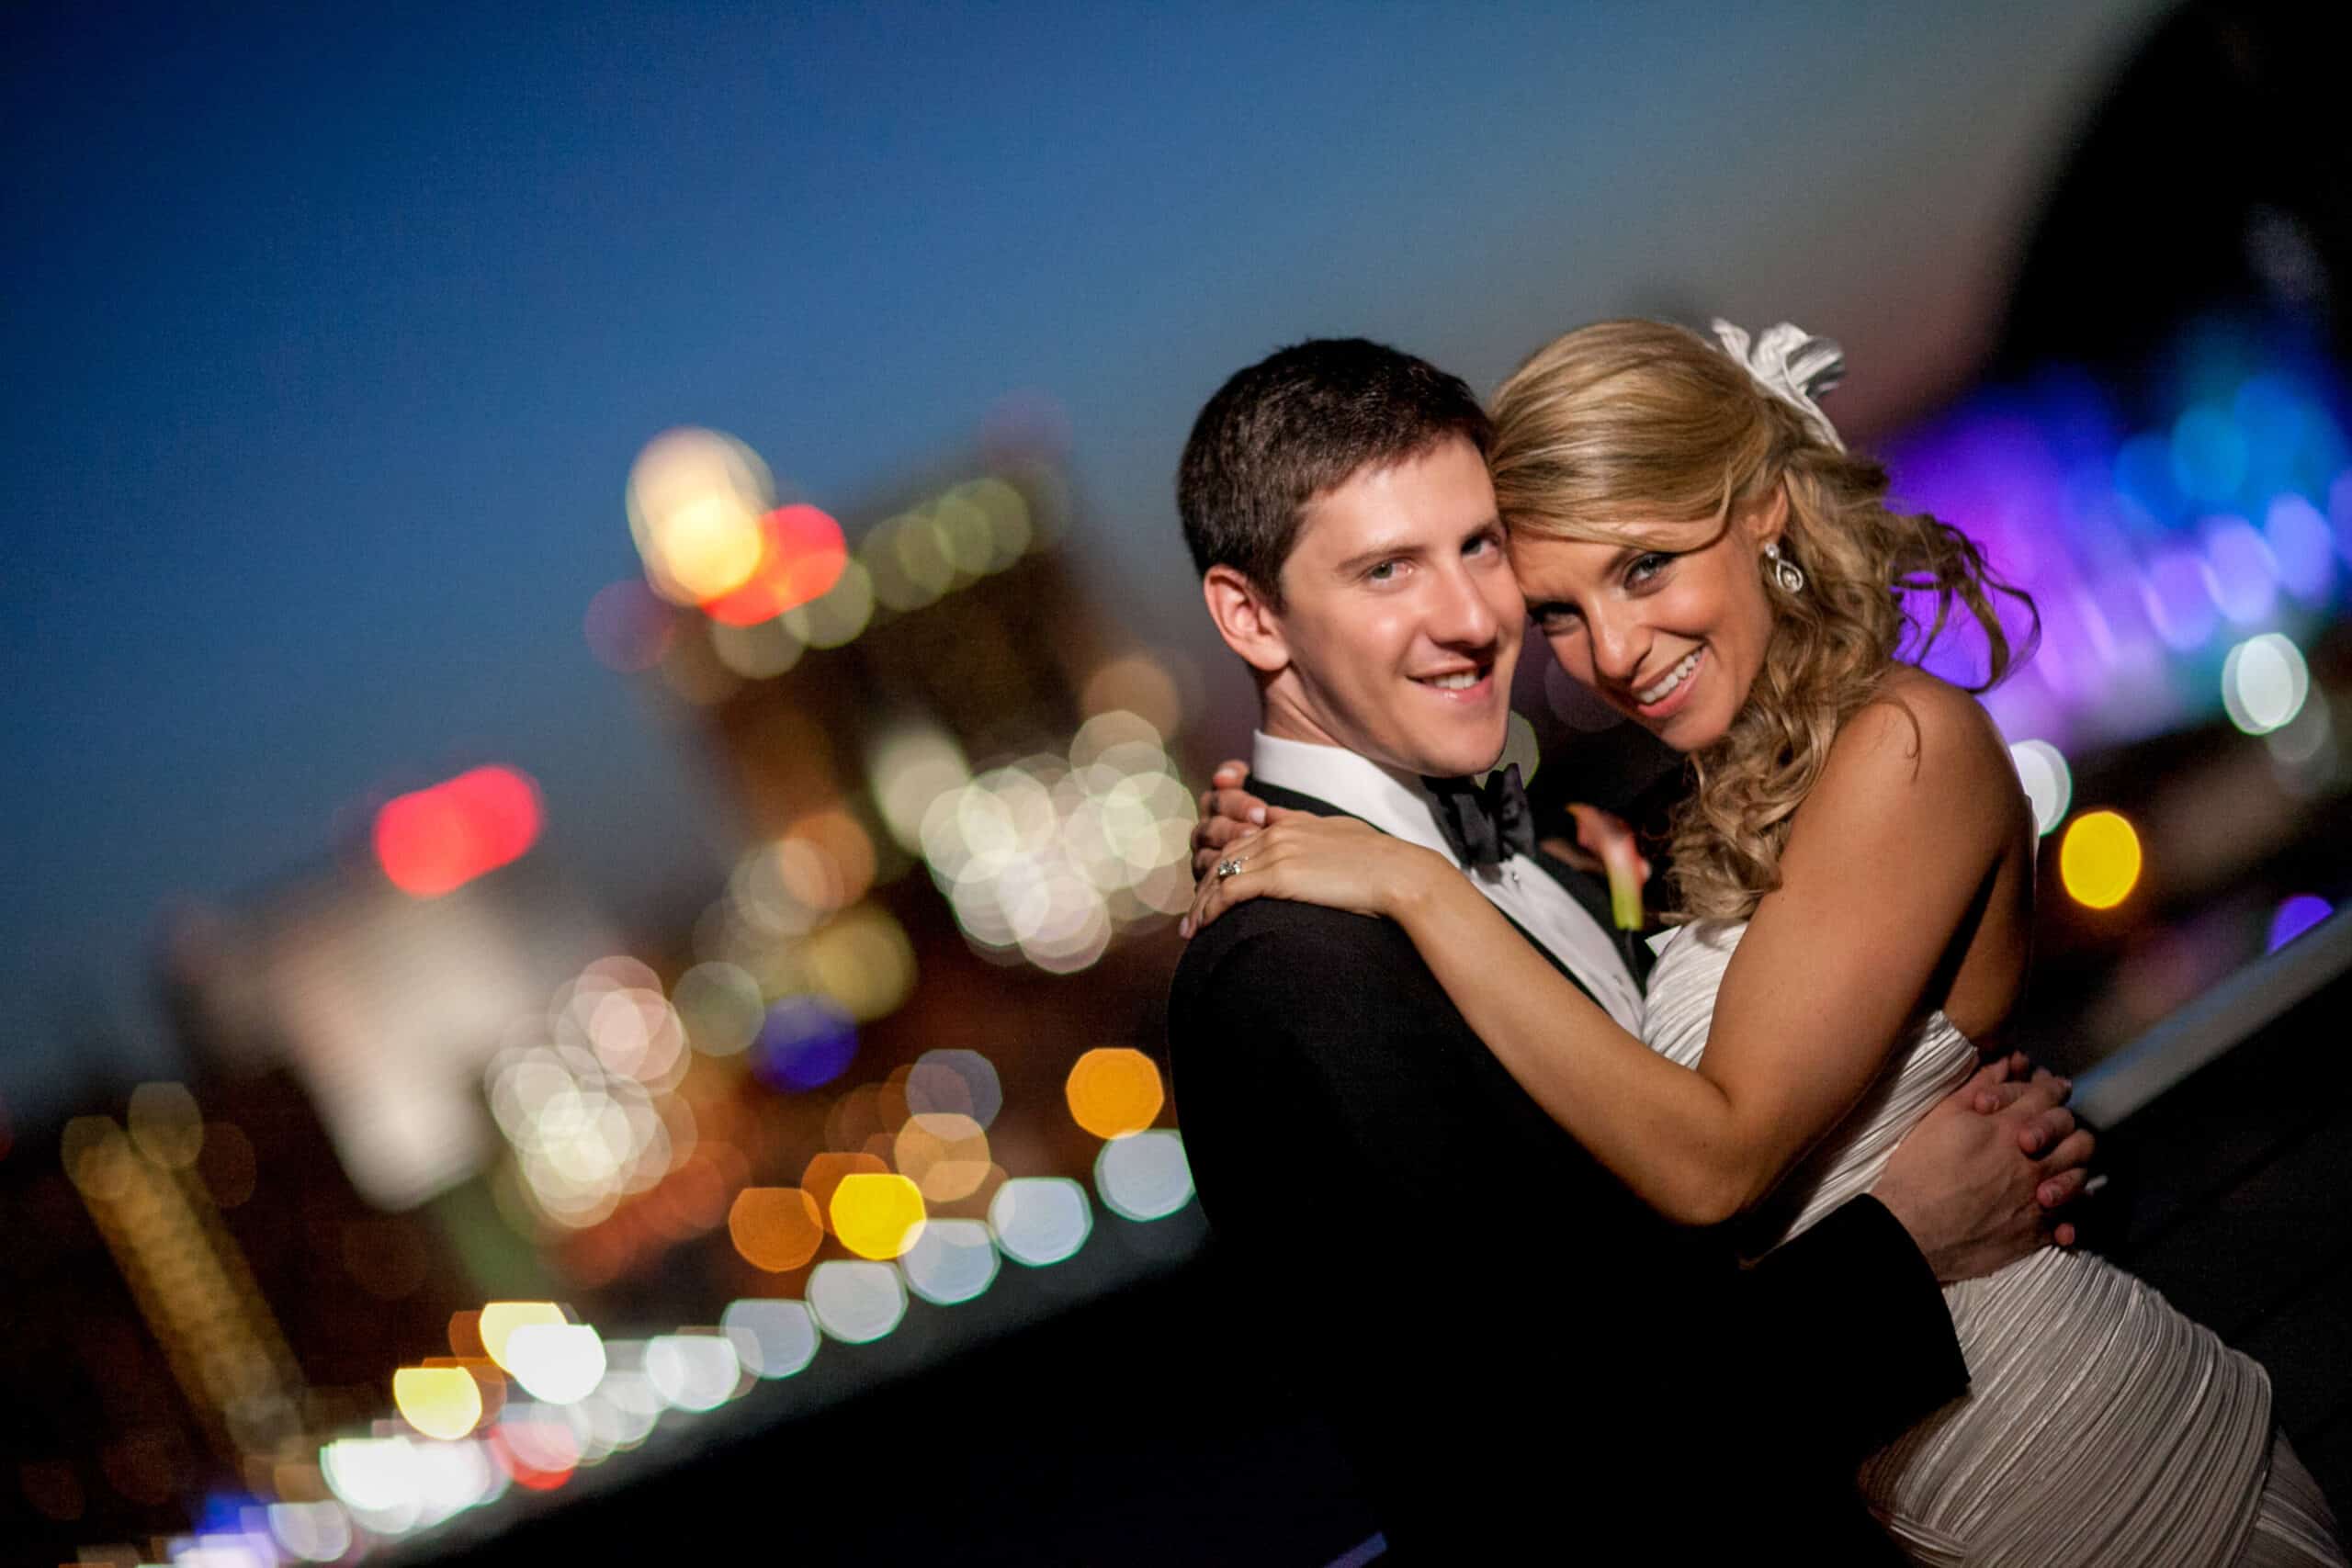 bride and groom embracing with AC skyline in the back